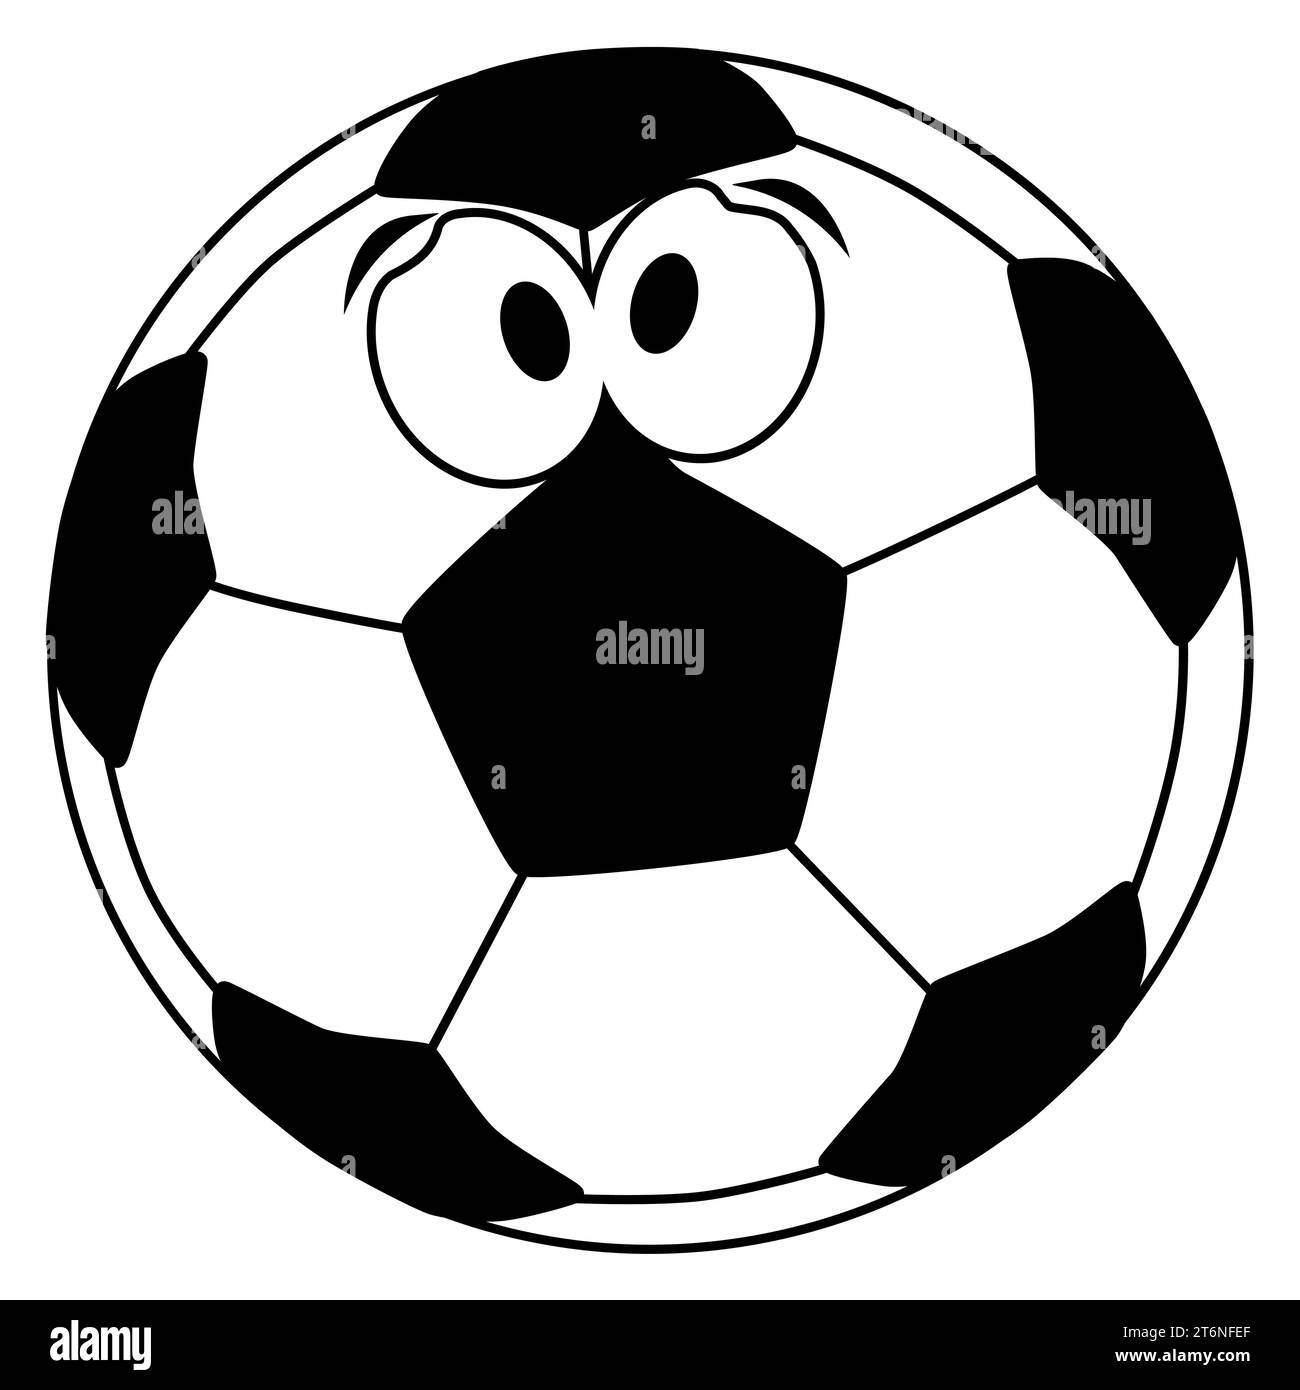 A cartoon style football joke face on a soccer football isolated over a white background. Stock Photo